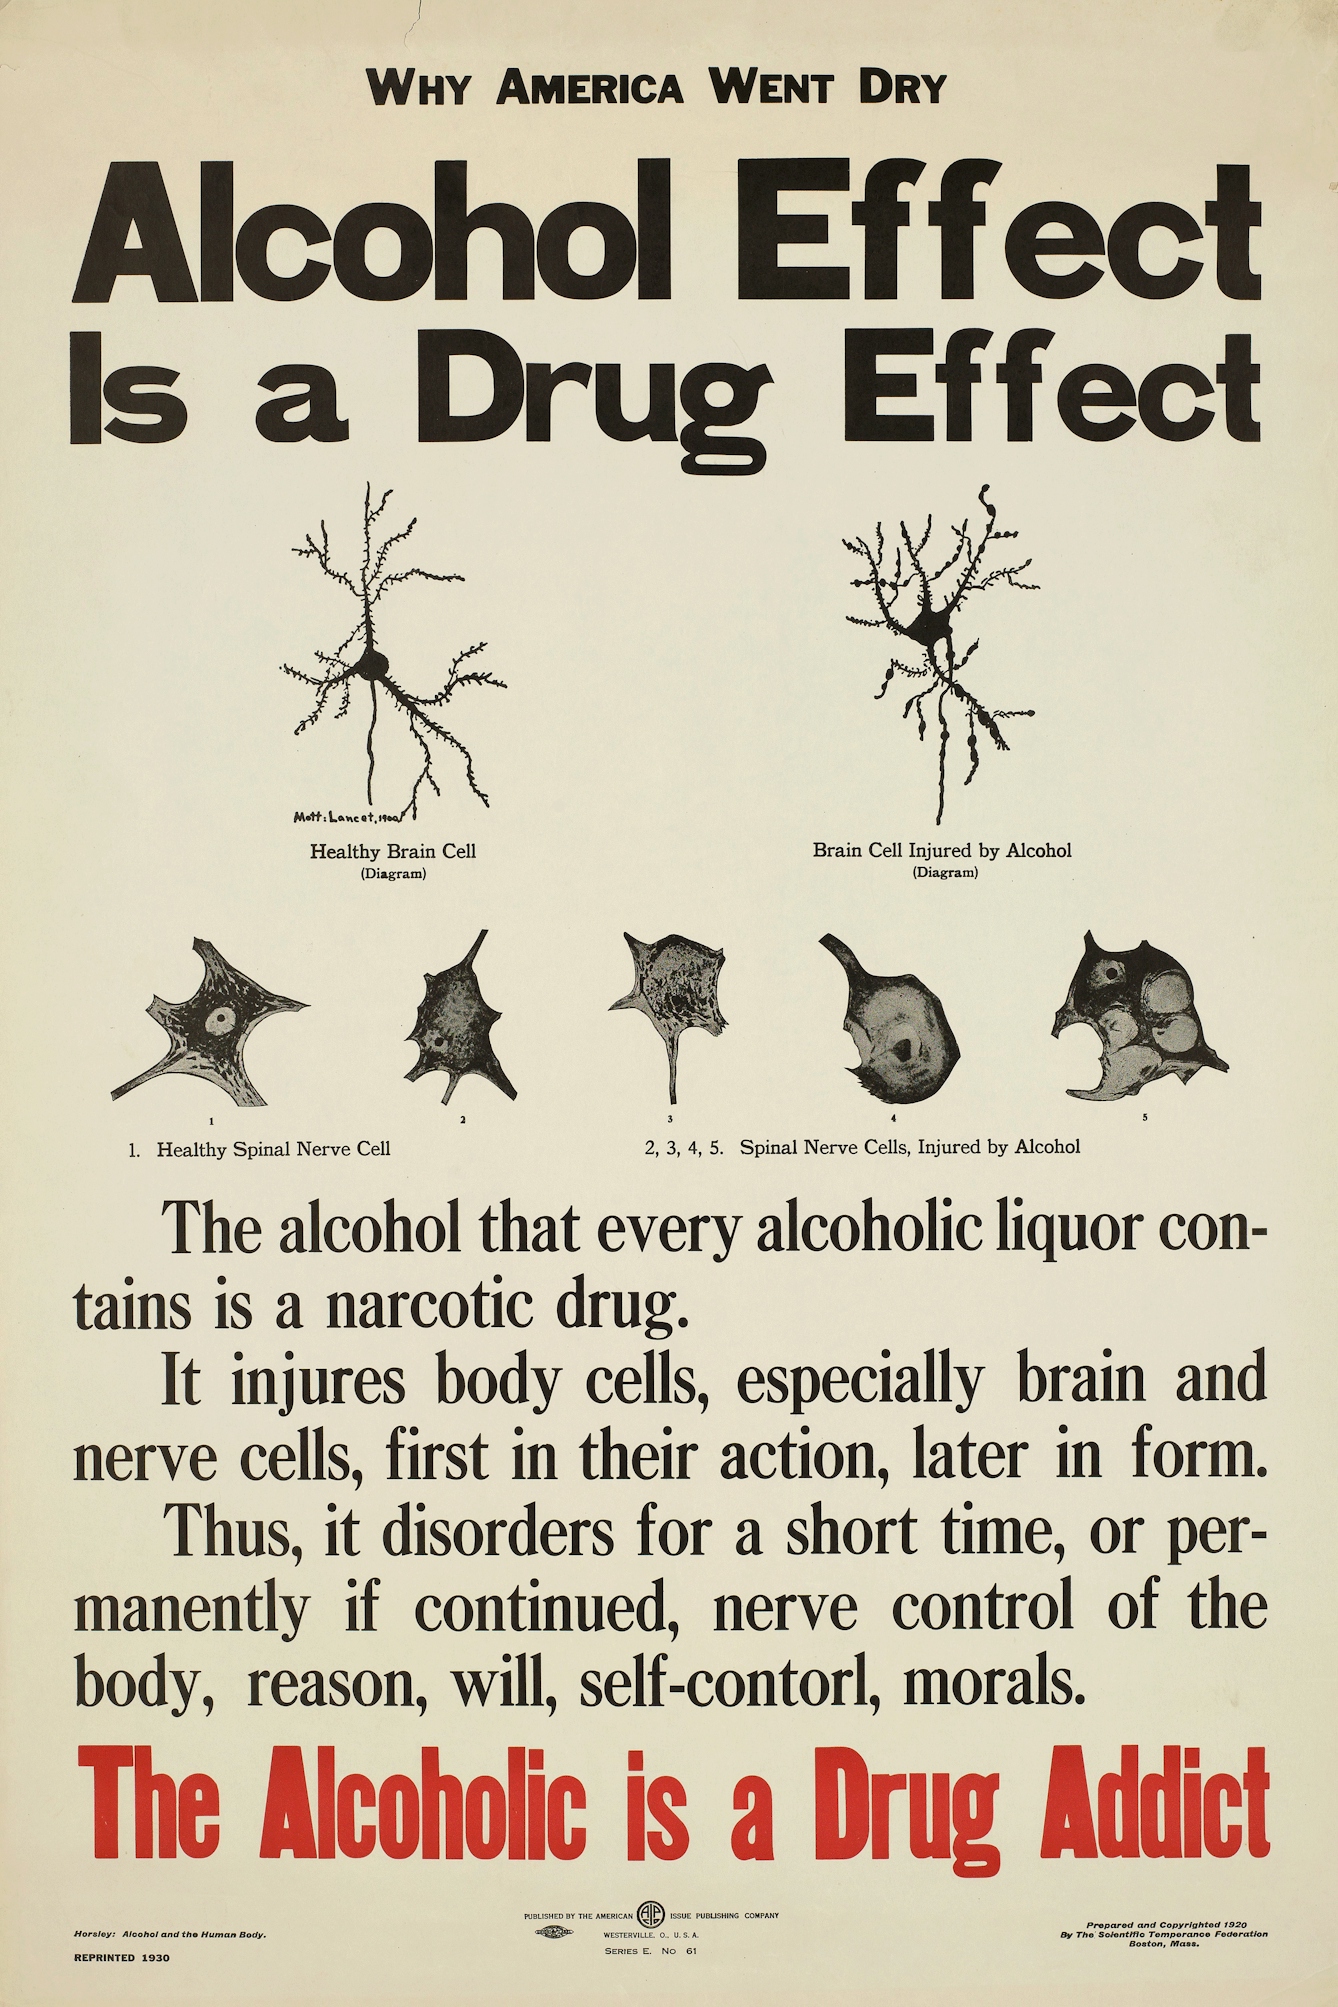 Poster showing "healthy brain cells and nerve cells" and contrasting them with those "injured by alcohol".